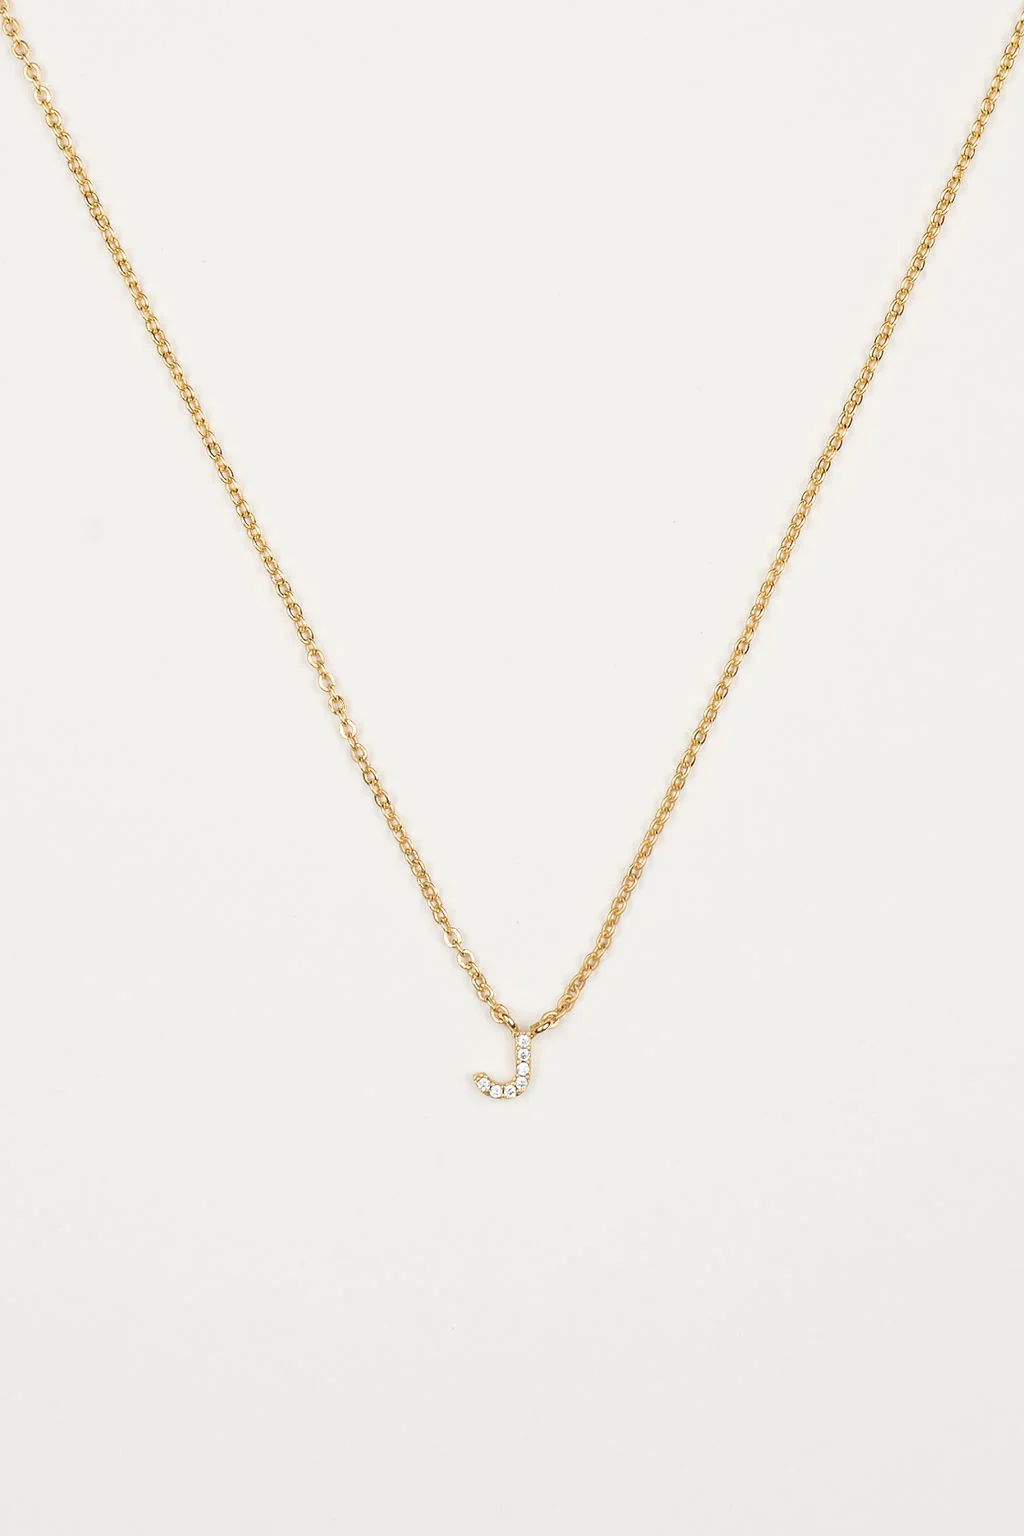 Brenda Grands Jewelry - Shiny Initial Necklace